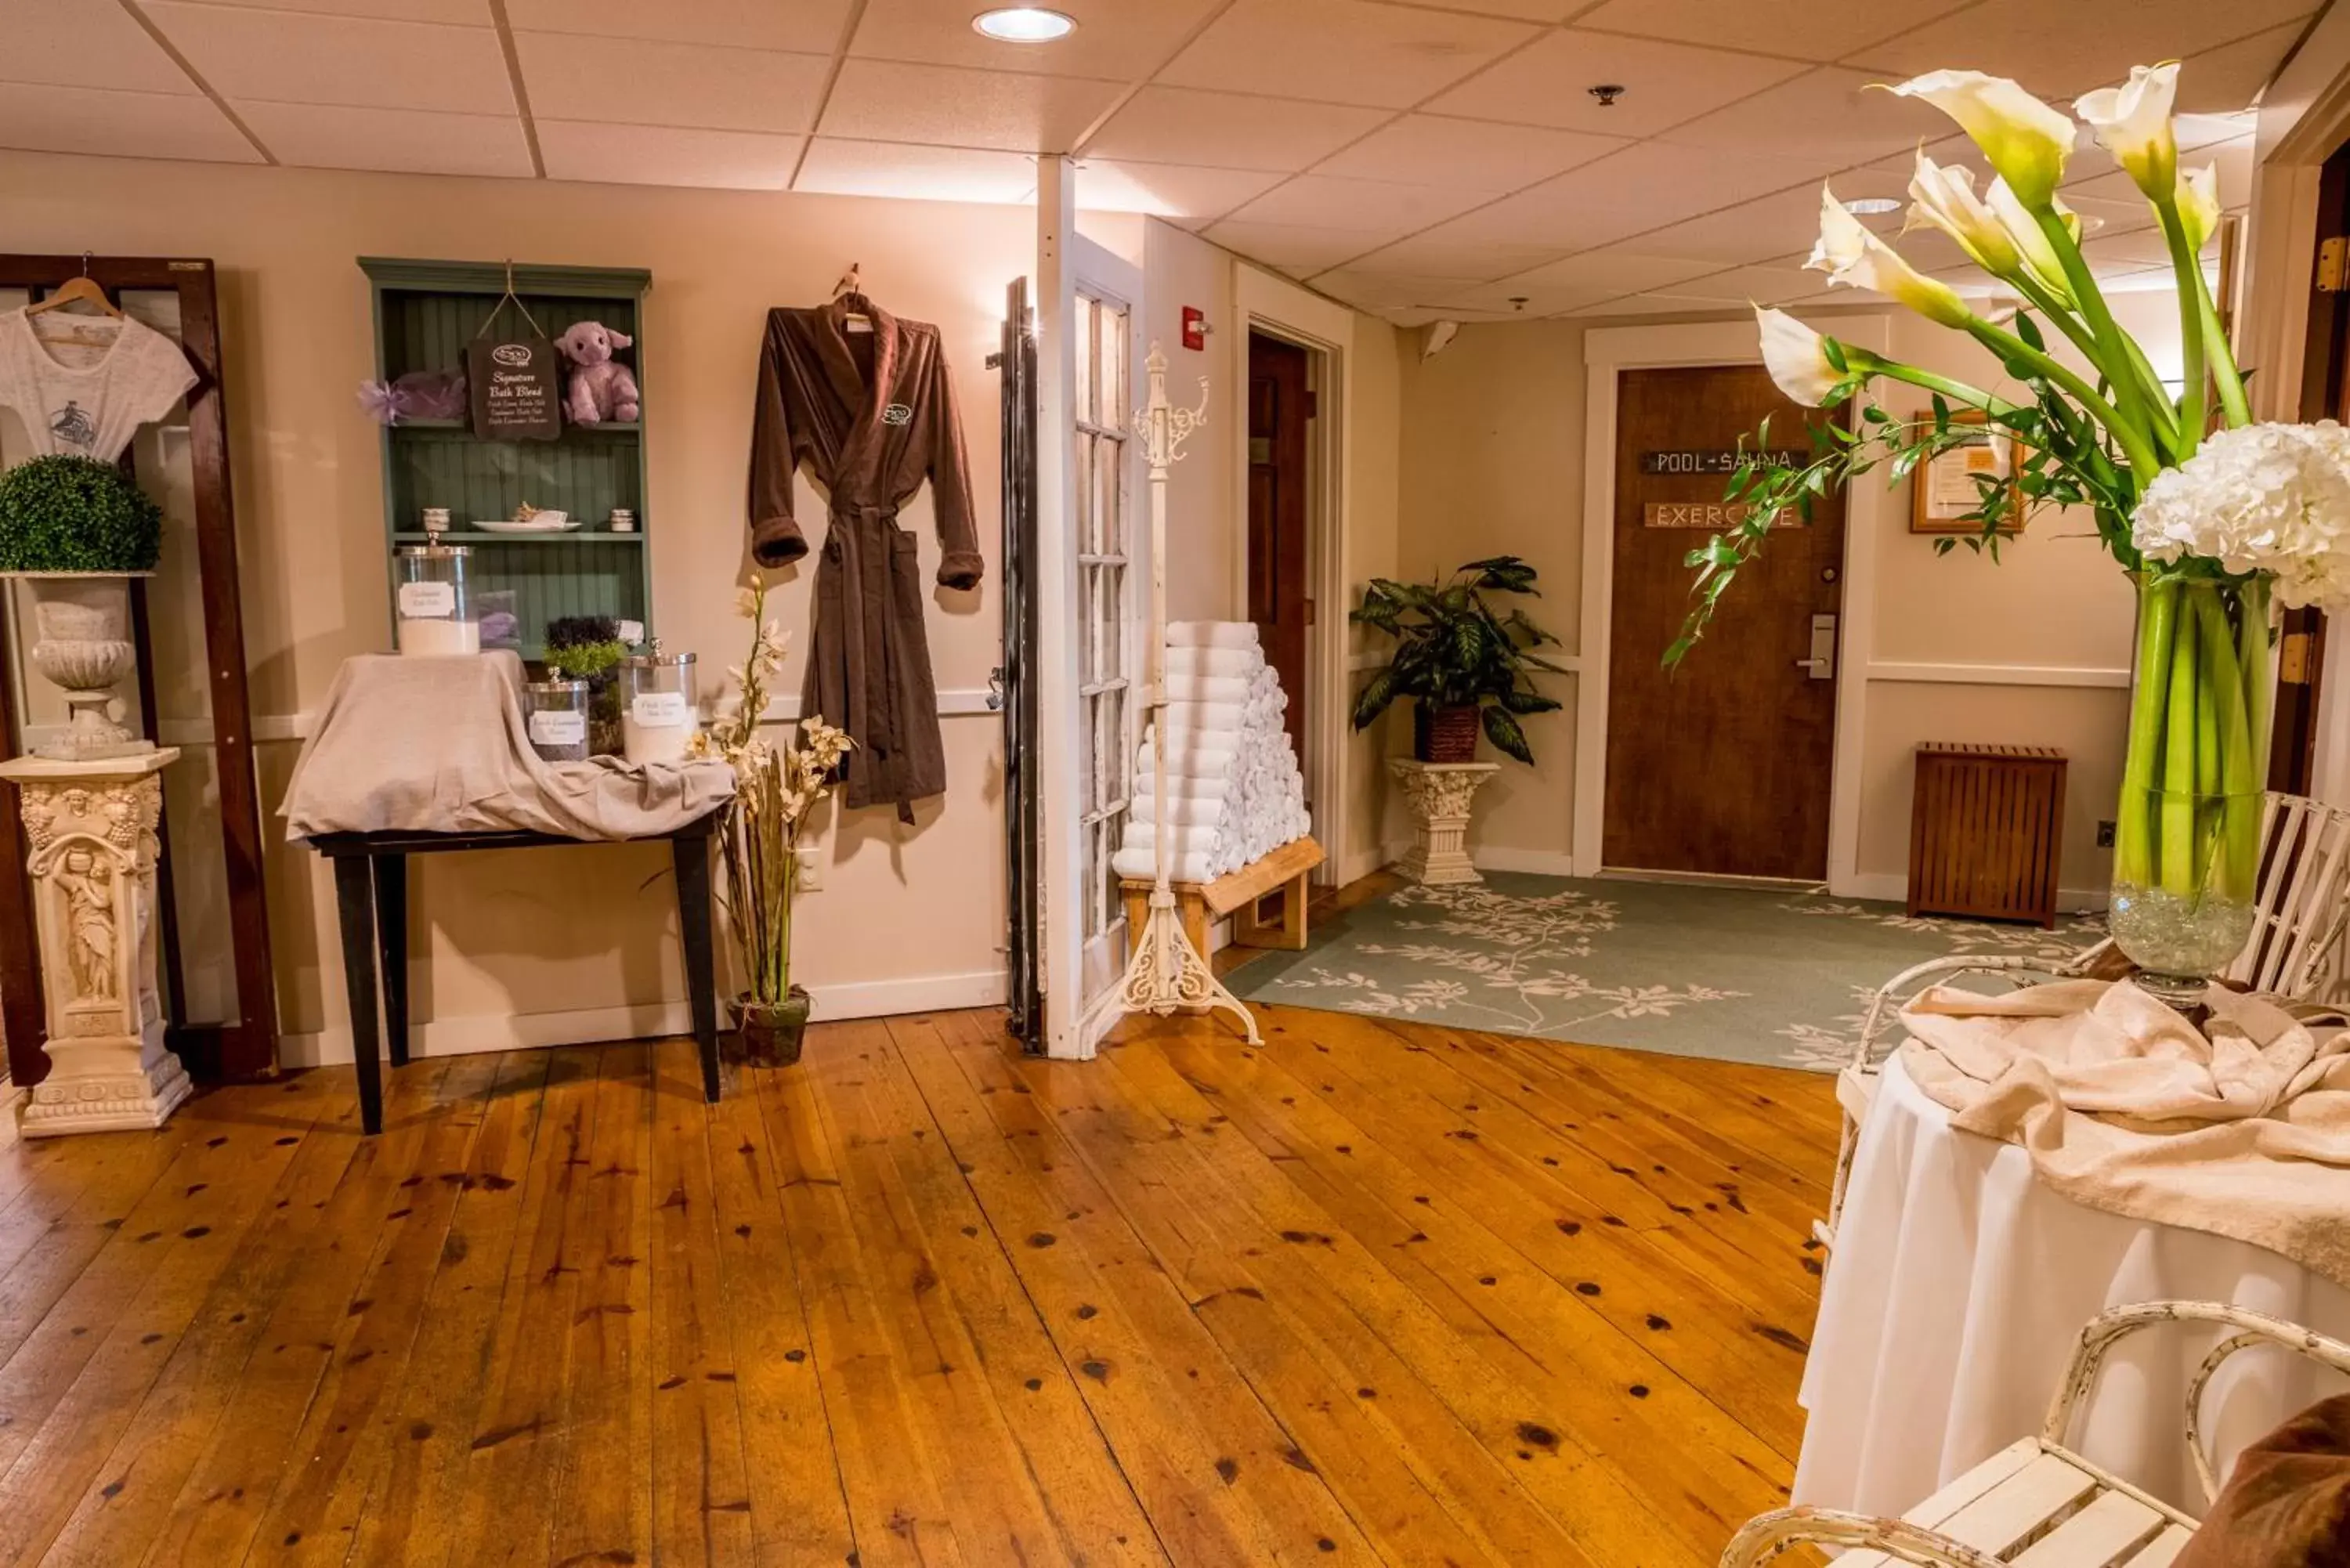 Spa and wellness centre/facilities in The Common Man Inn, Spa & Lodge